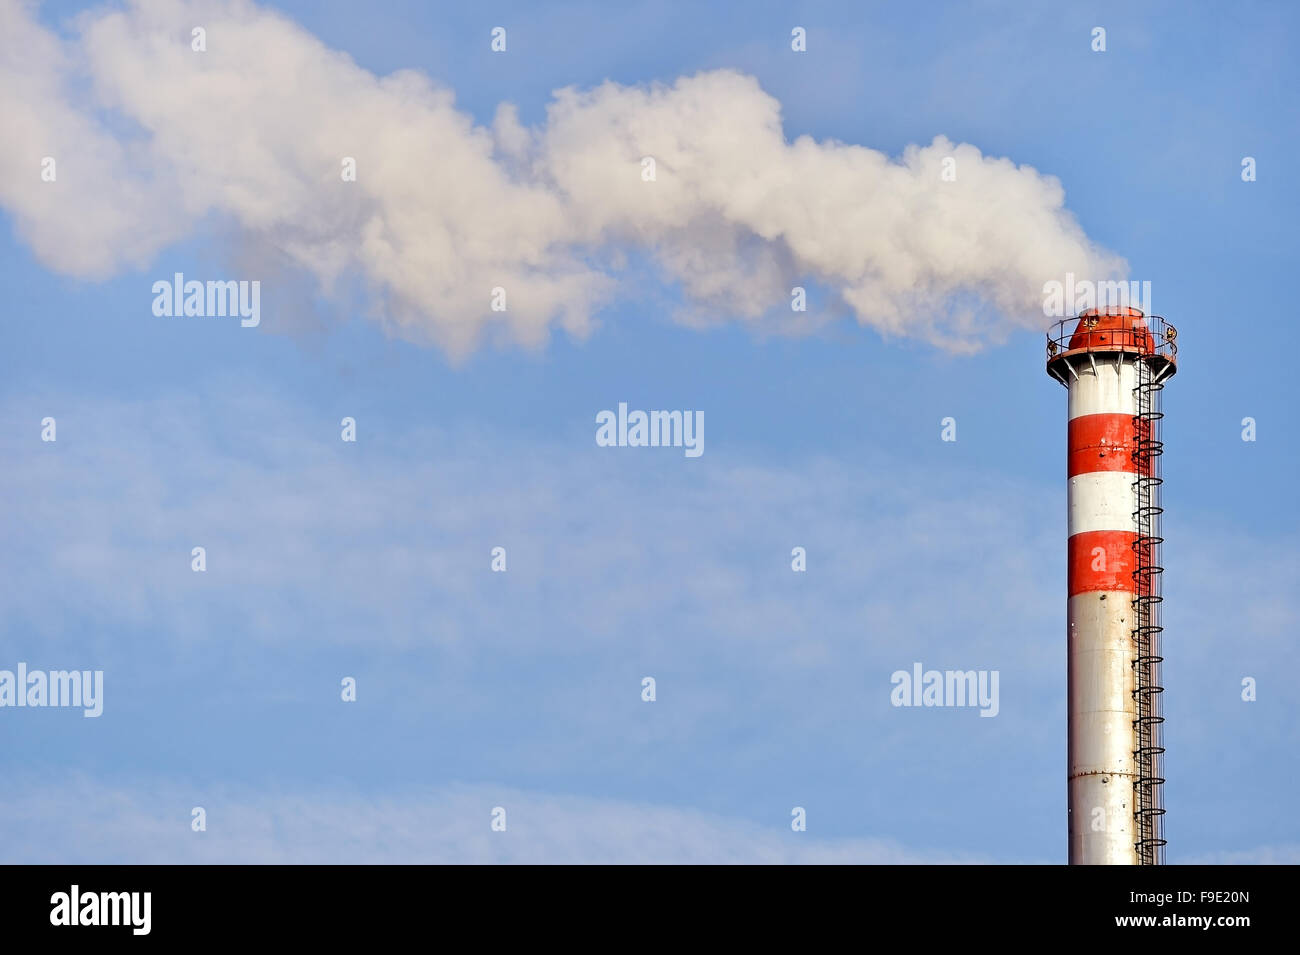 Smoke and steam coming out from an industrial petrochemical plant chimney with a blue sky on the background Stock Photo